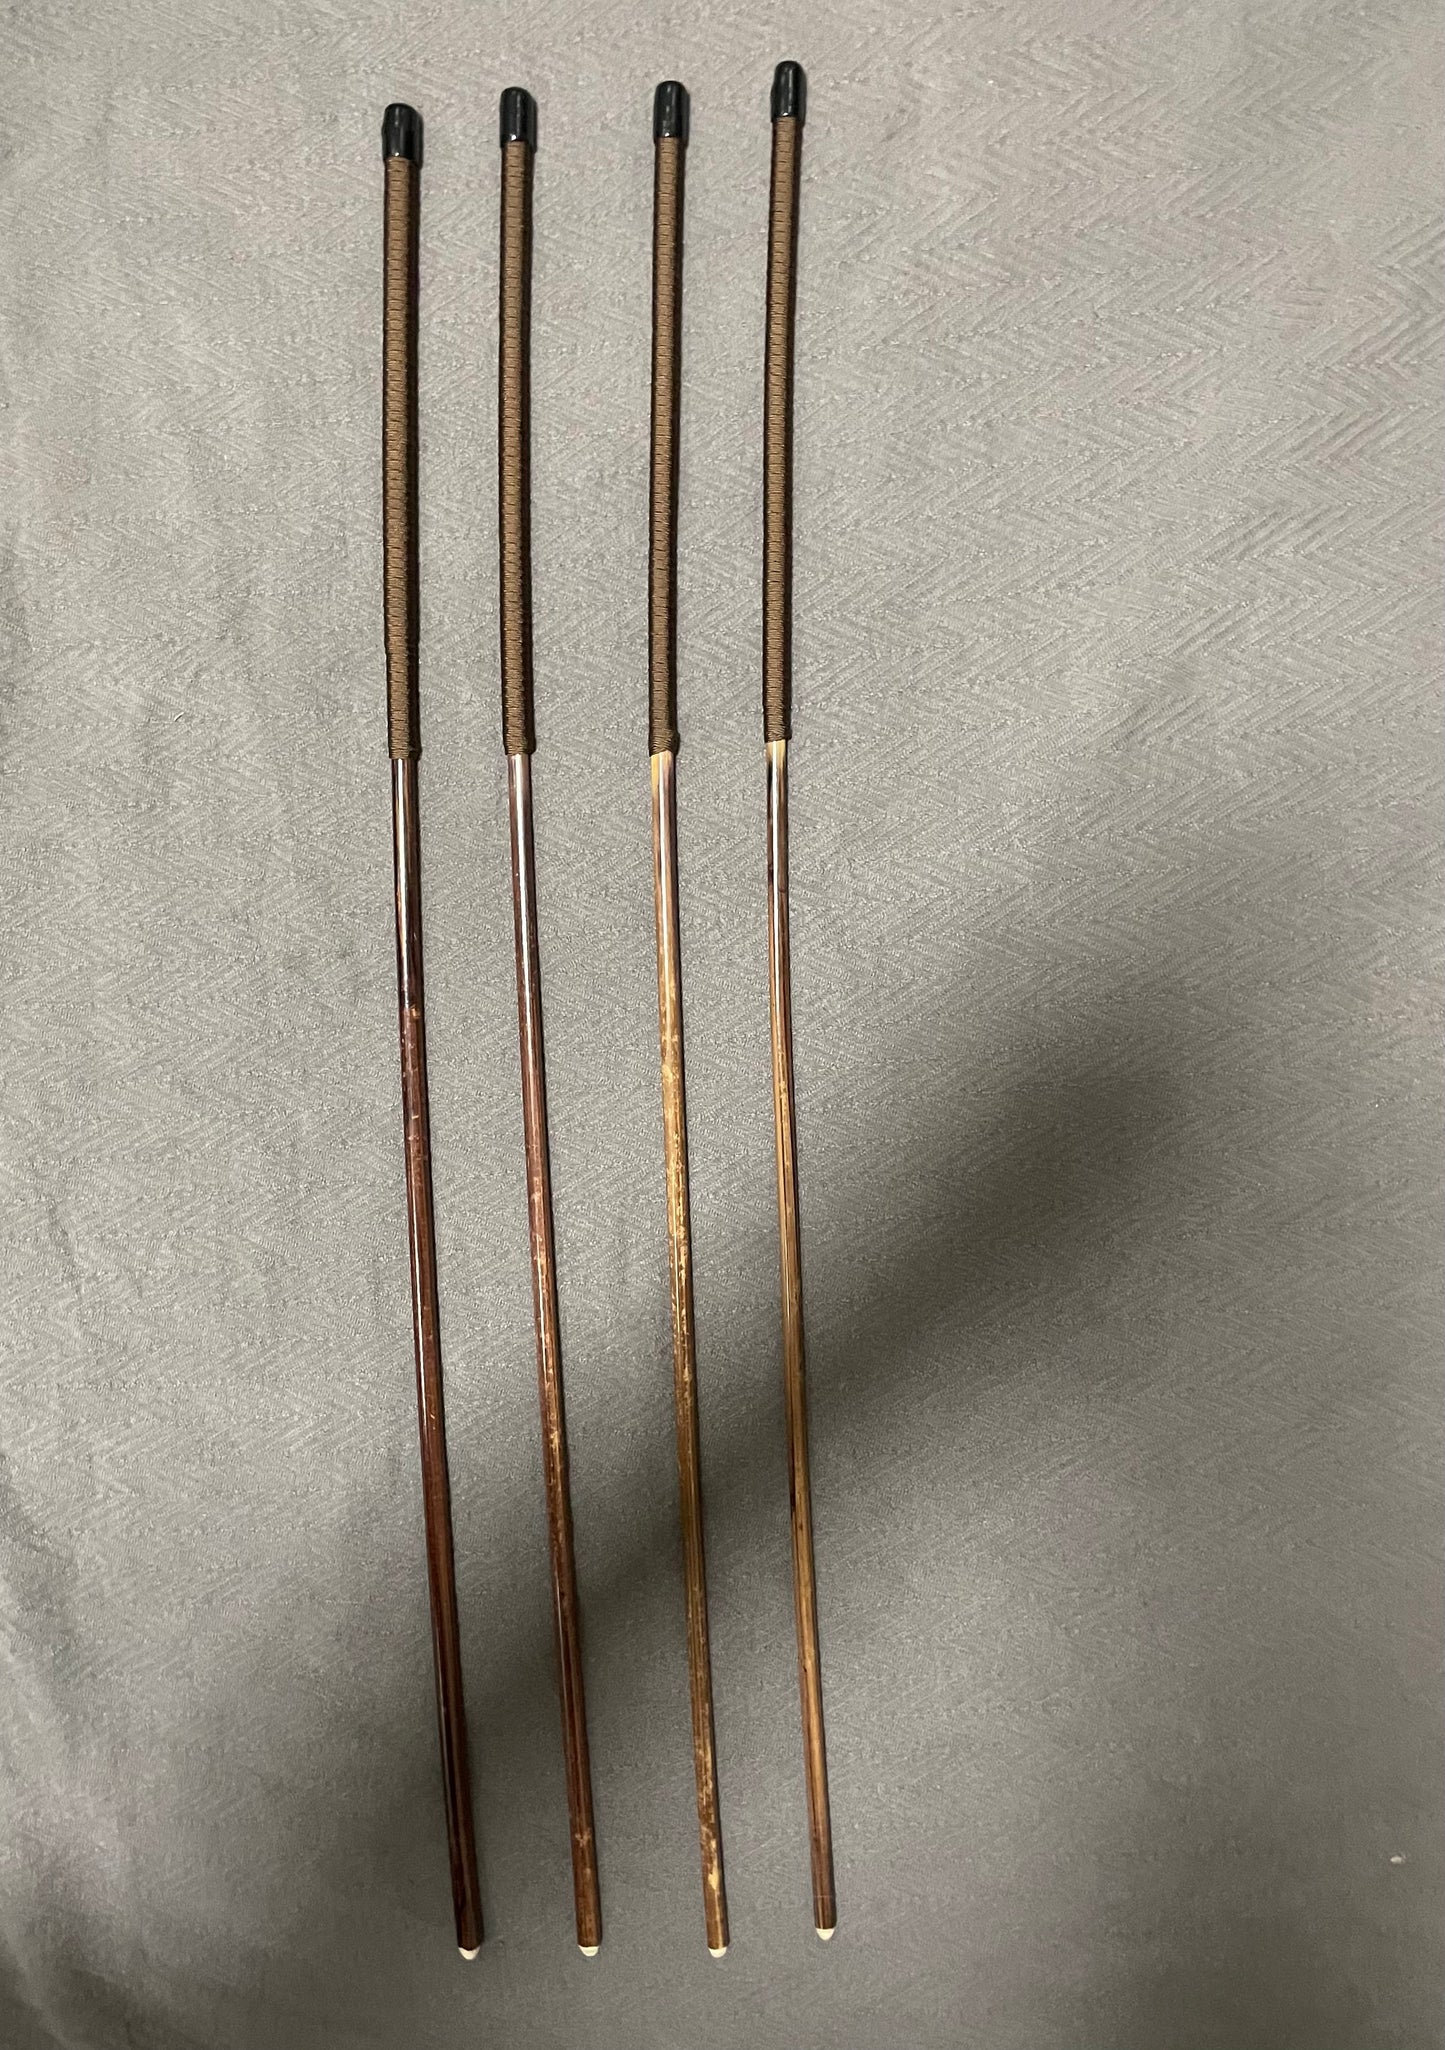 Set of 4 Knotless Smoked Dragon Canes / Ultimate No Knot Smoked Dragon Canes  / School Canes / BDSM Canes - 95 cms Length - Brown Paracord Handles